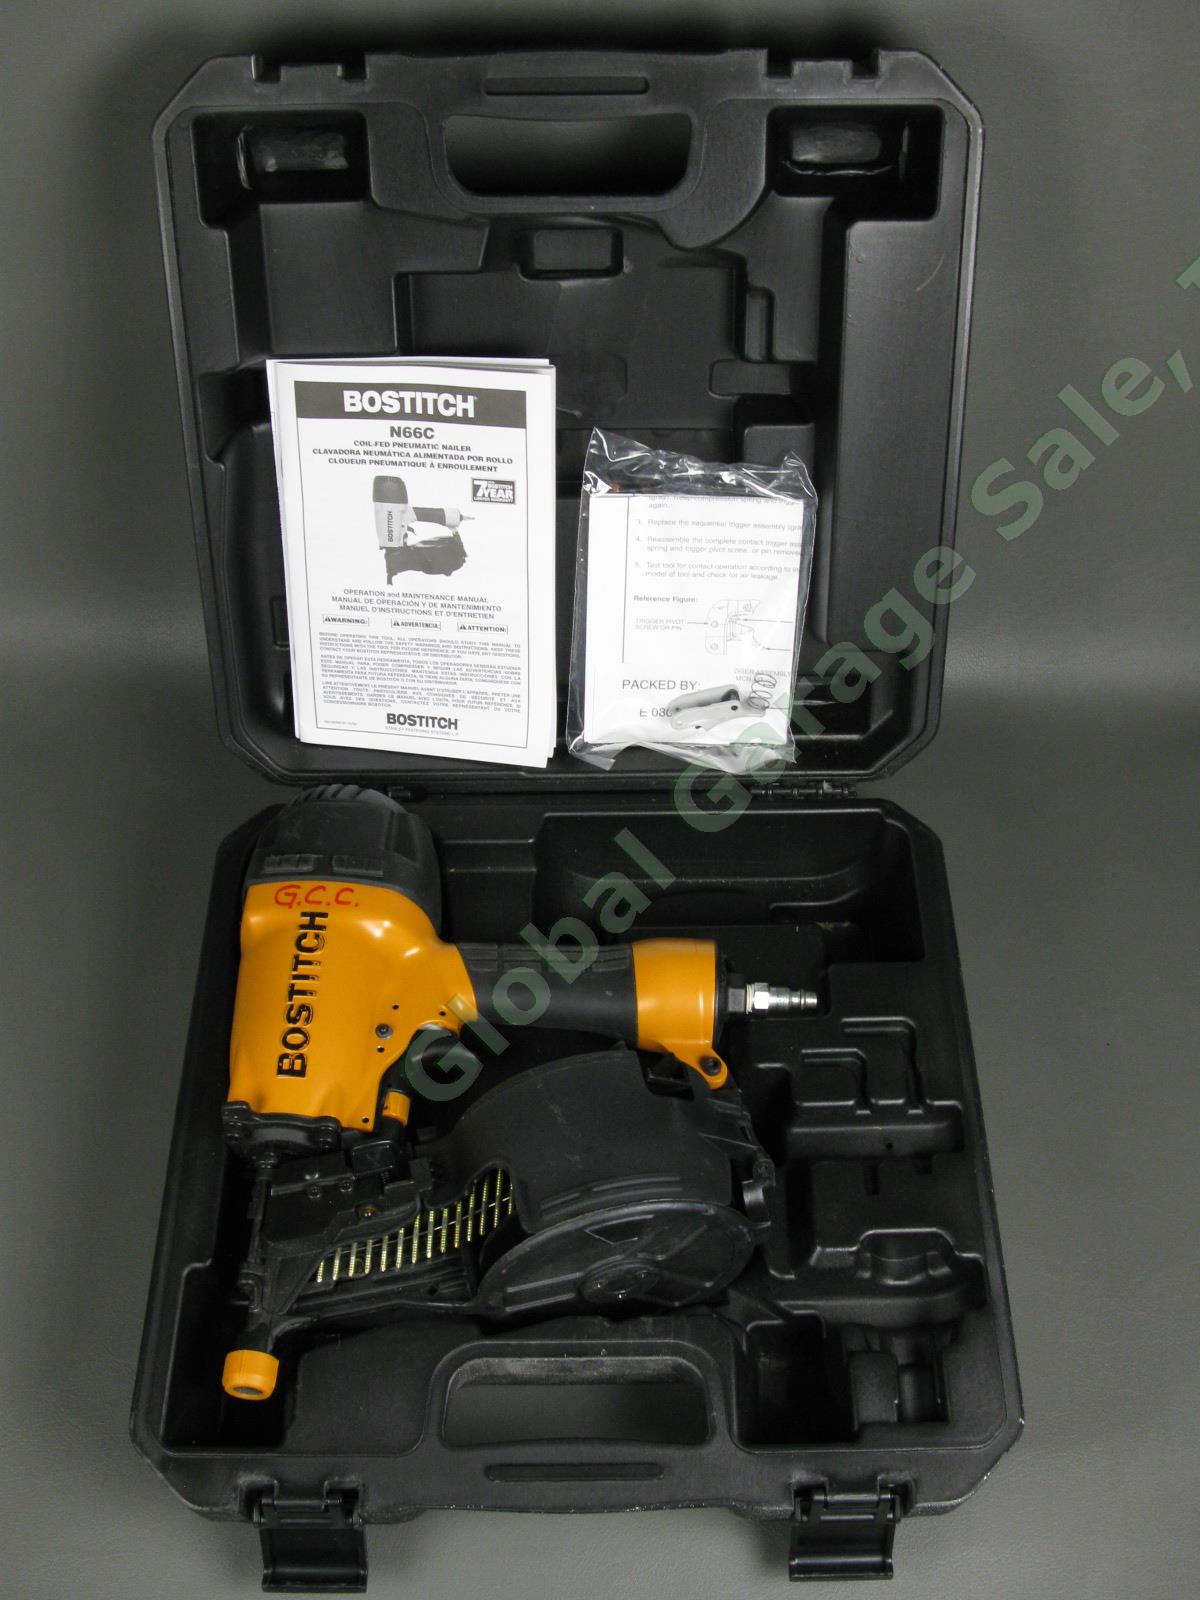 Bostitch N66C-1 1-1/4" To 2-1/2" 15-Degree Coil Pneumatic Siding Fencing Nailer